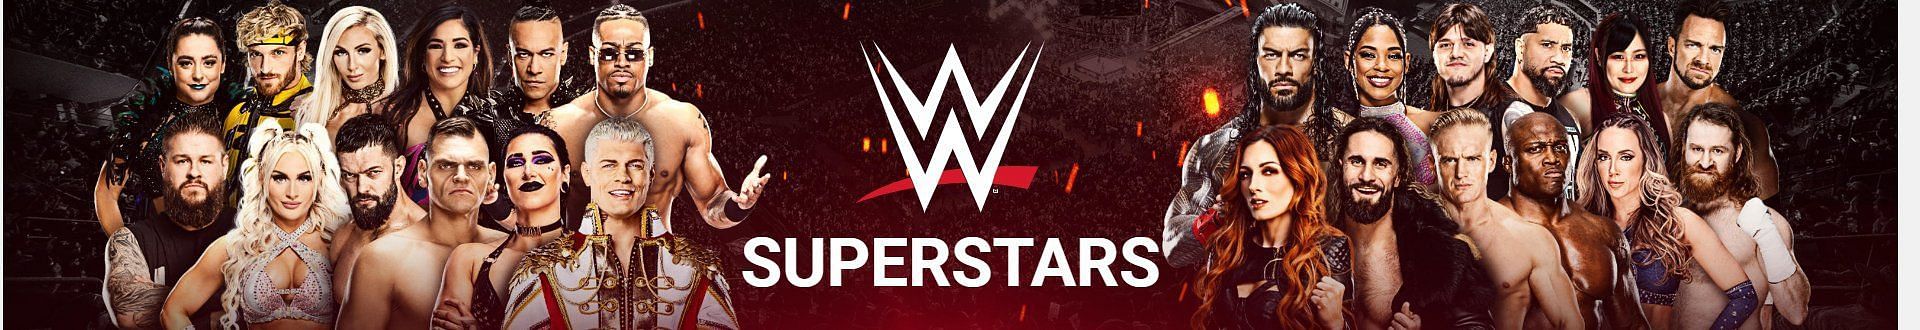 The old WWE Superstars banner with Kevin Owens and Sami Zayn